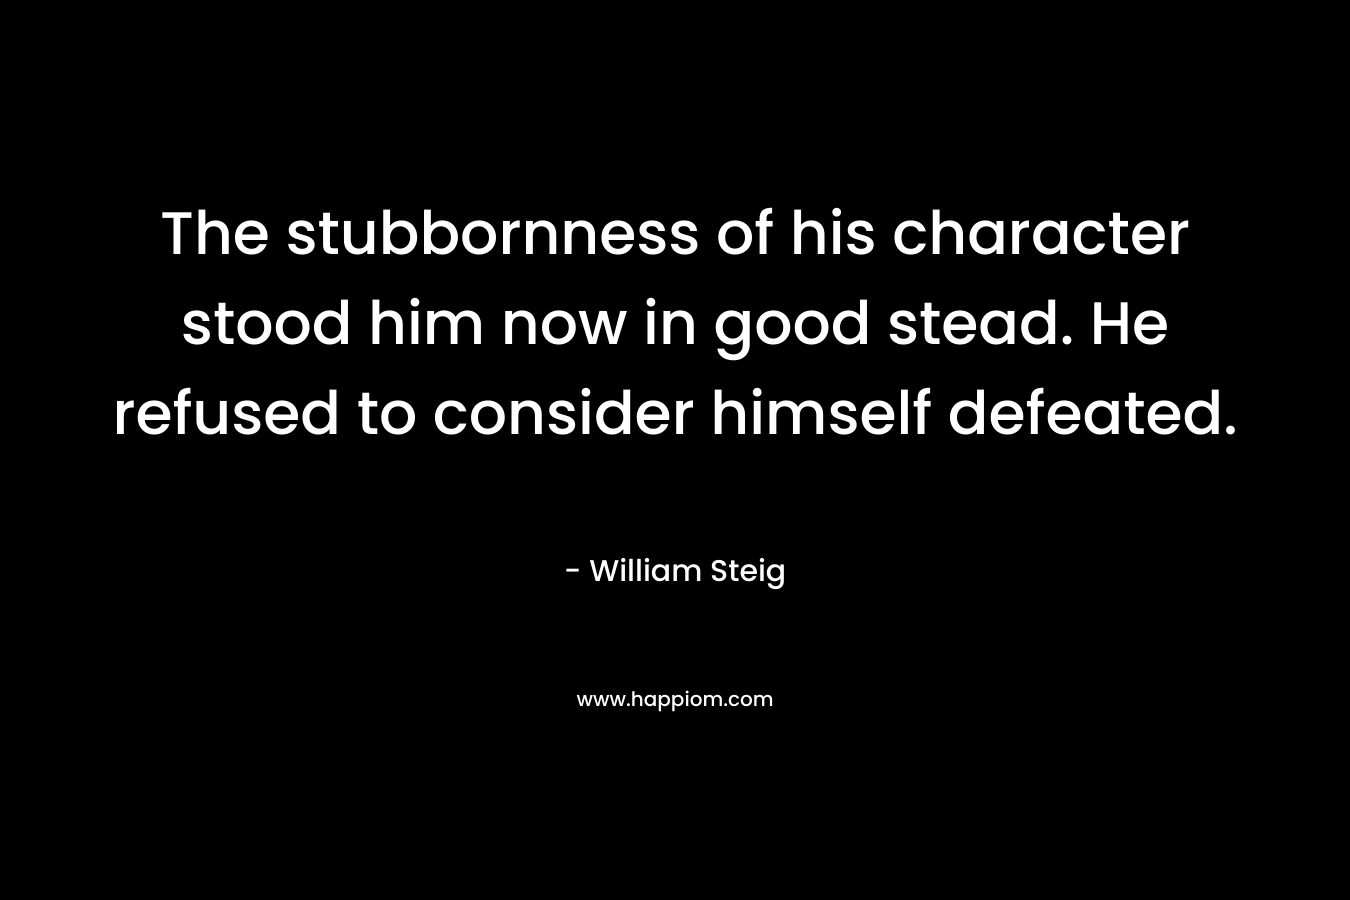 The stubbornness of his character stood him now in good stead. He refused to consider himself defeated.